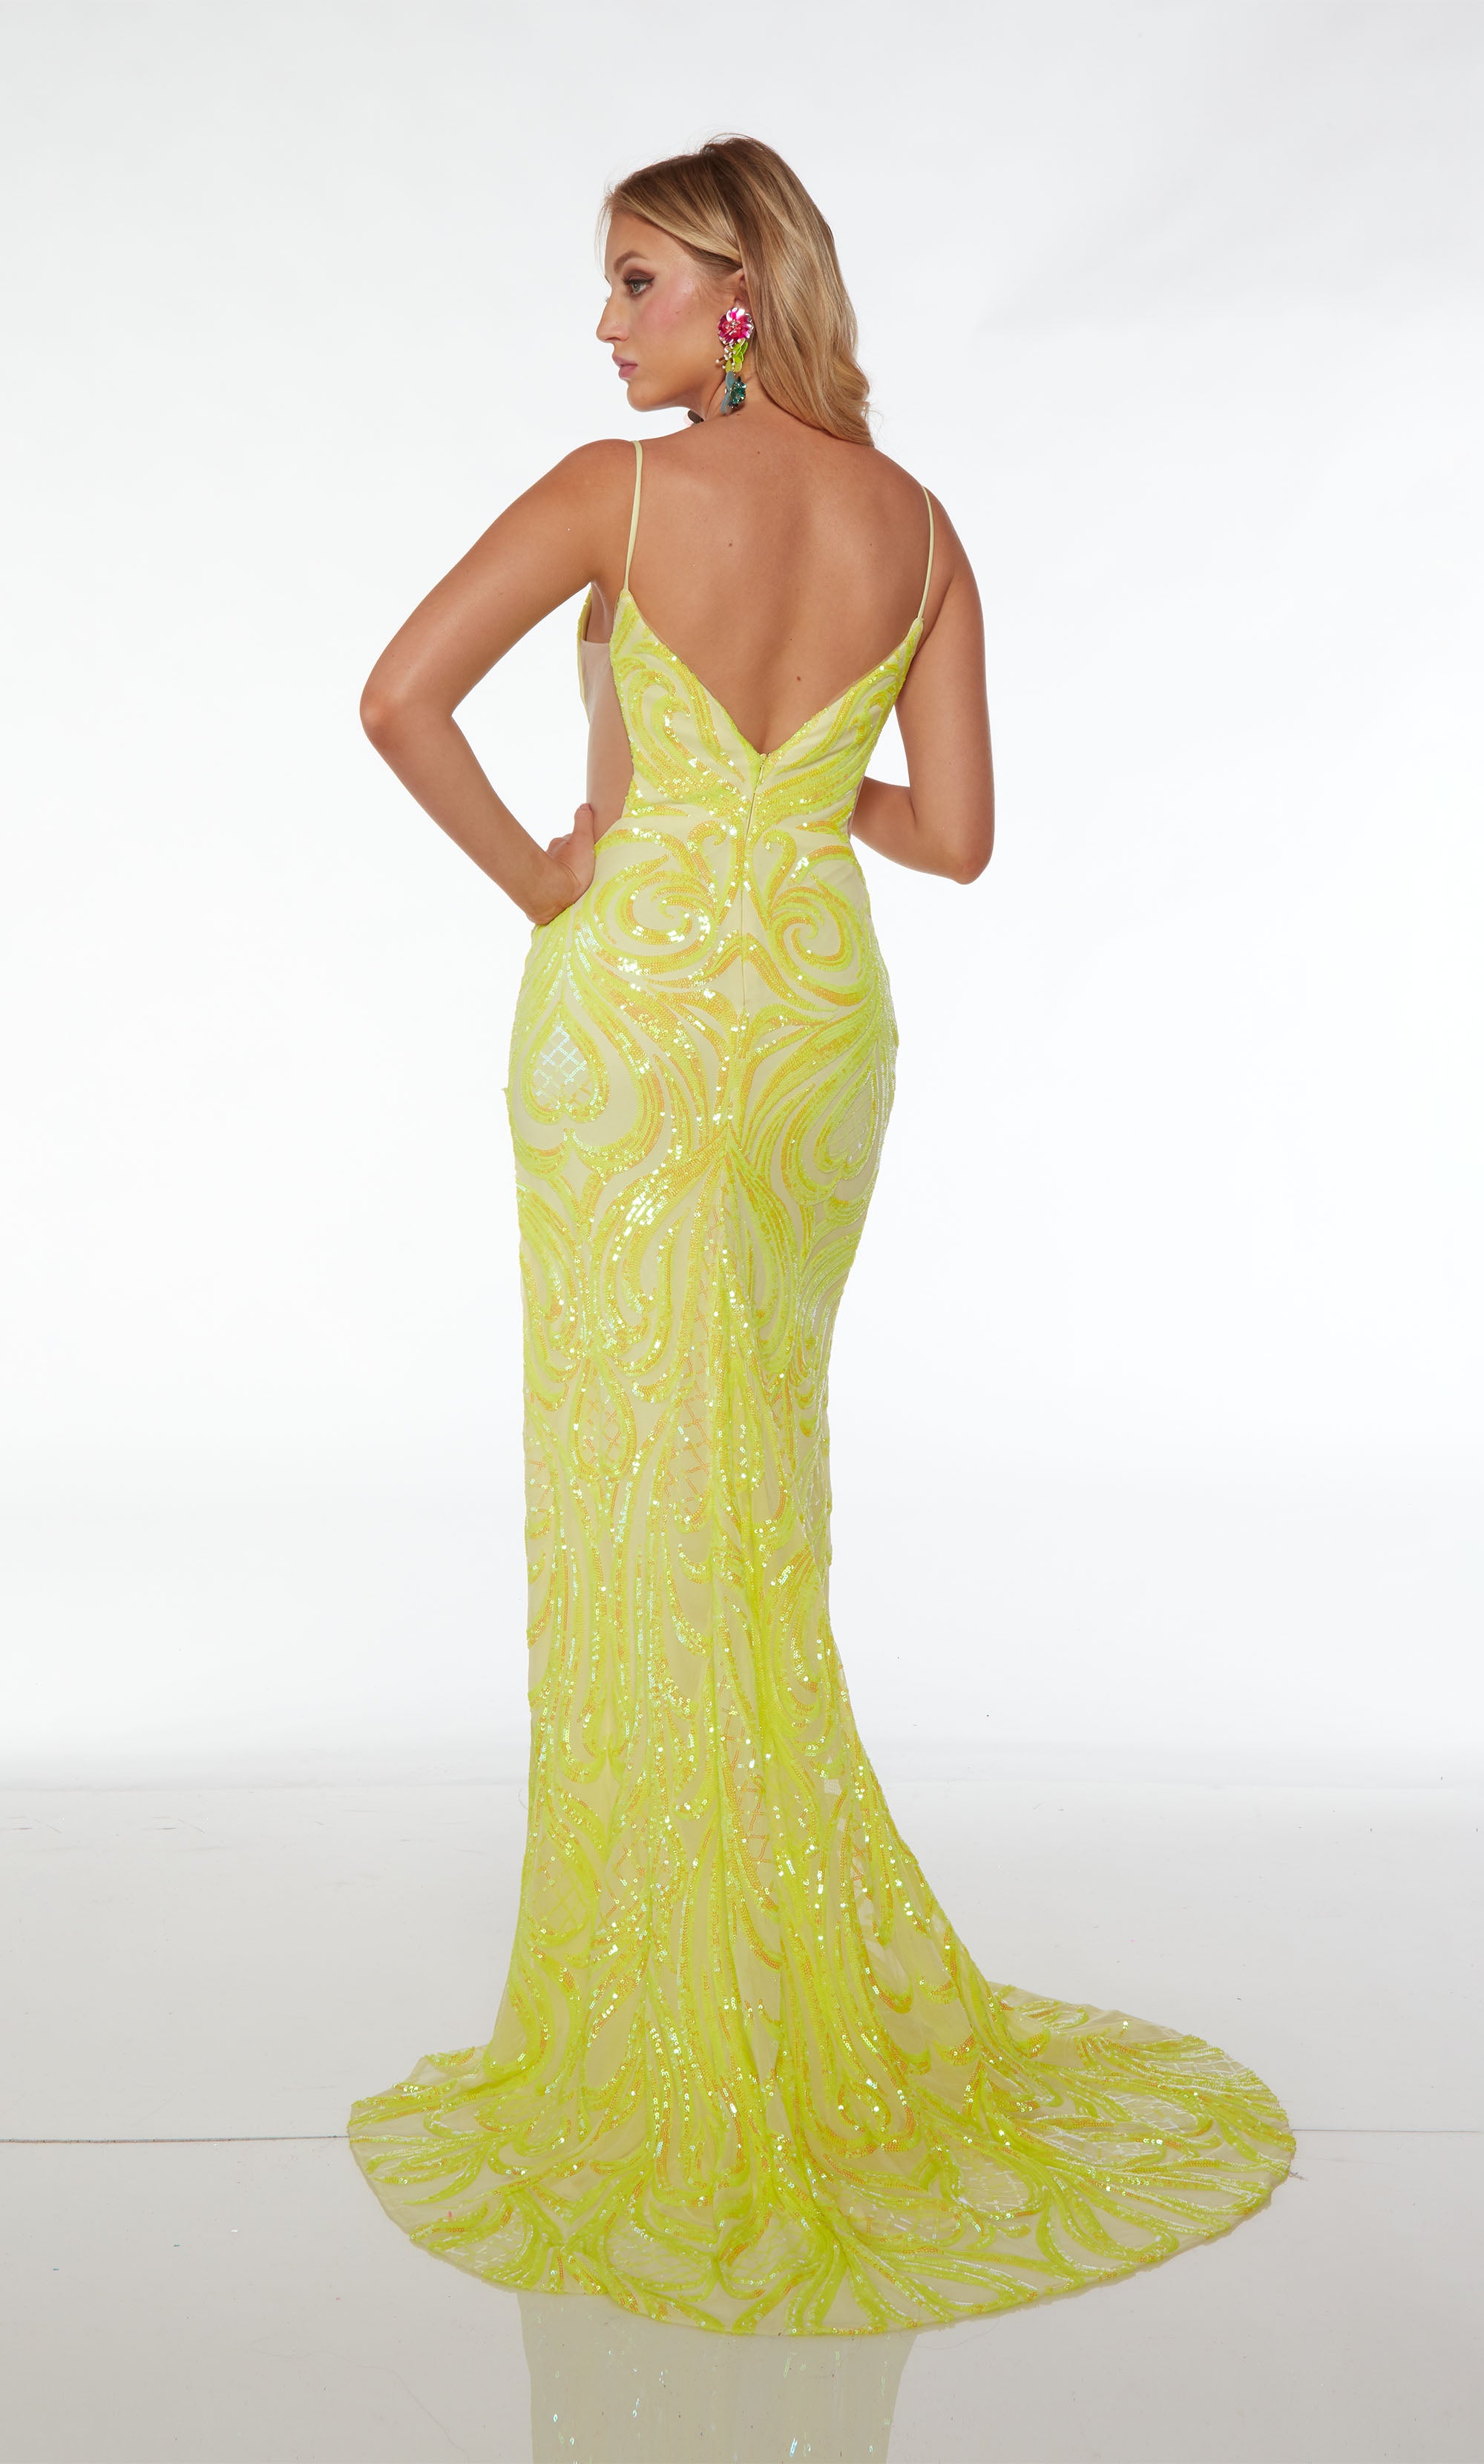 Unique yellow sequin prom dress: illusion plunging neckline, side cutouts, high slit, V-shaped back, and an beautiful design, exuding style.